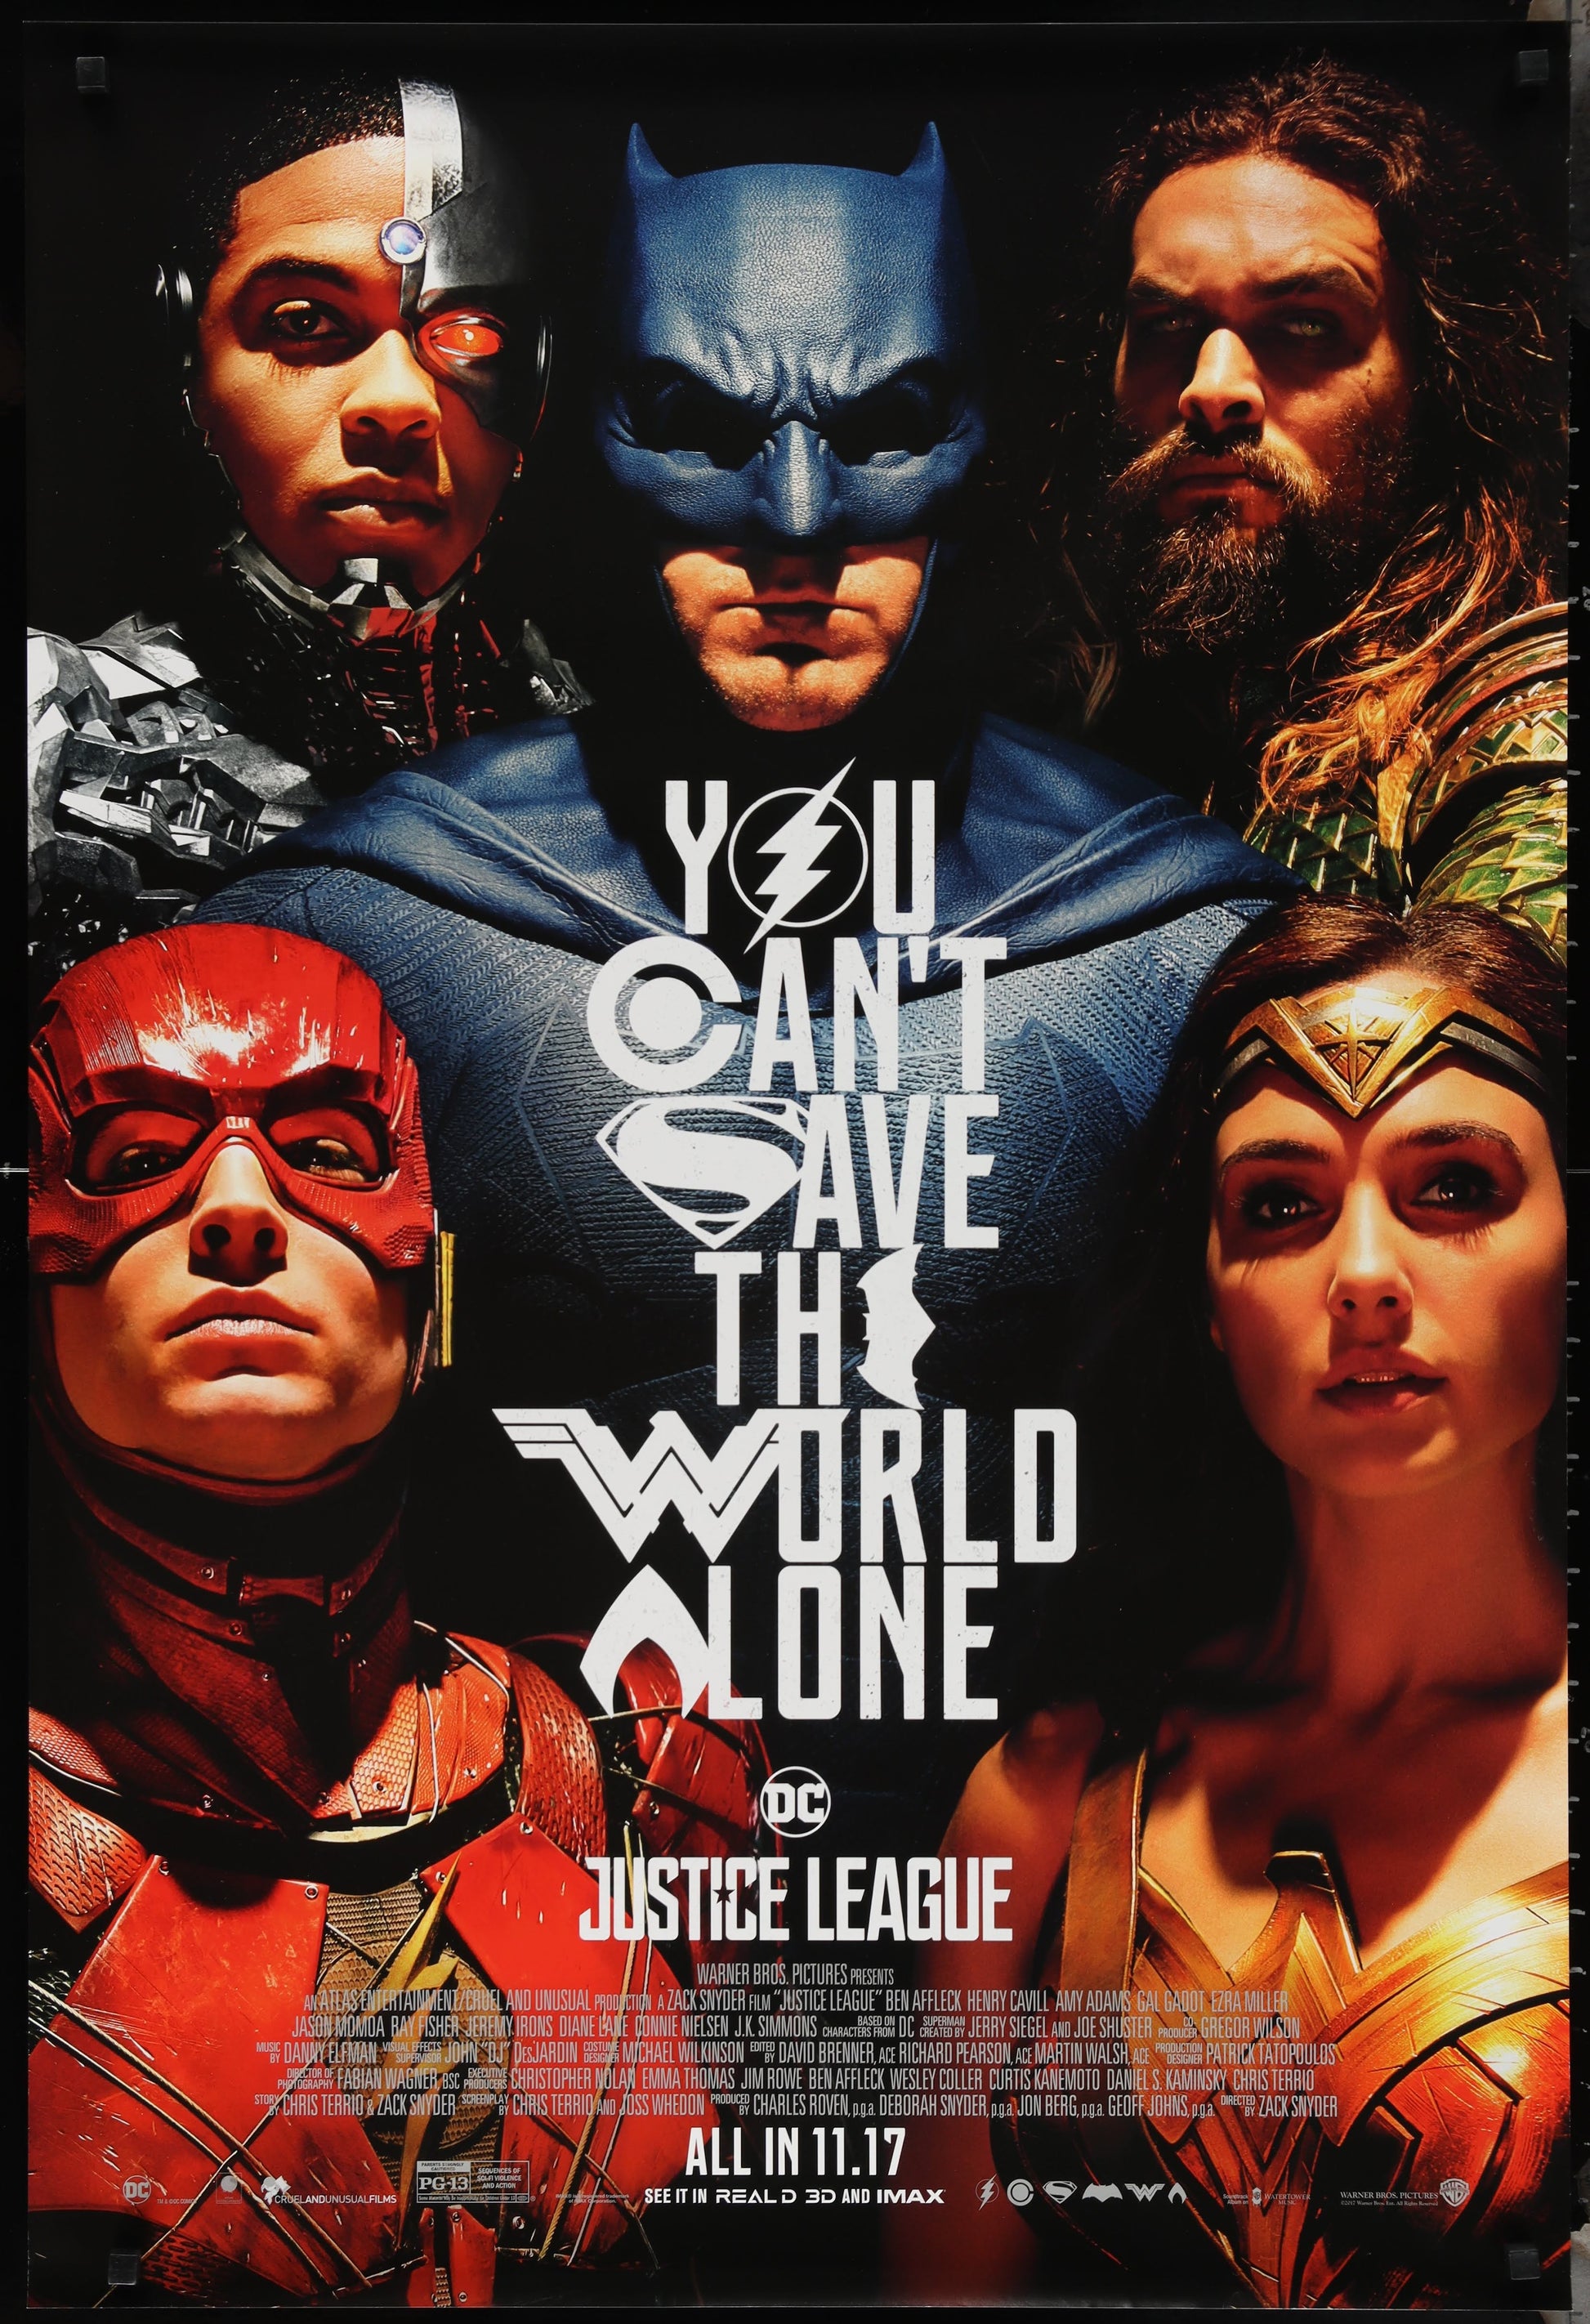 Justice League US One Sheet (2017) - ORIGINAL RELEASE - posterpalace.com